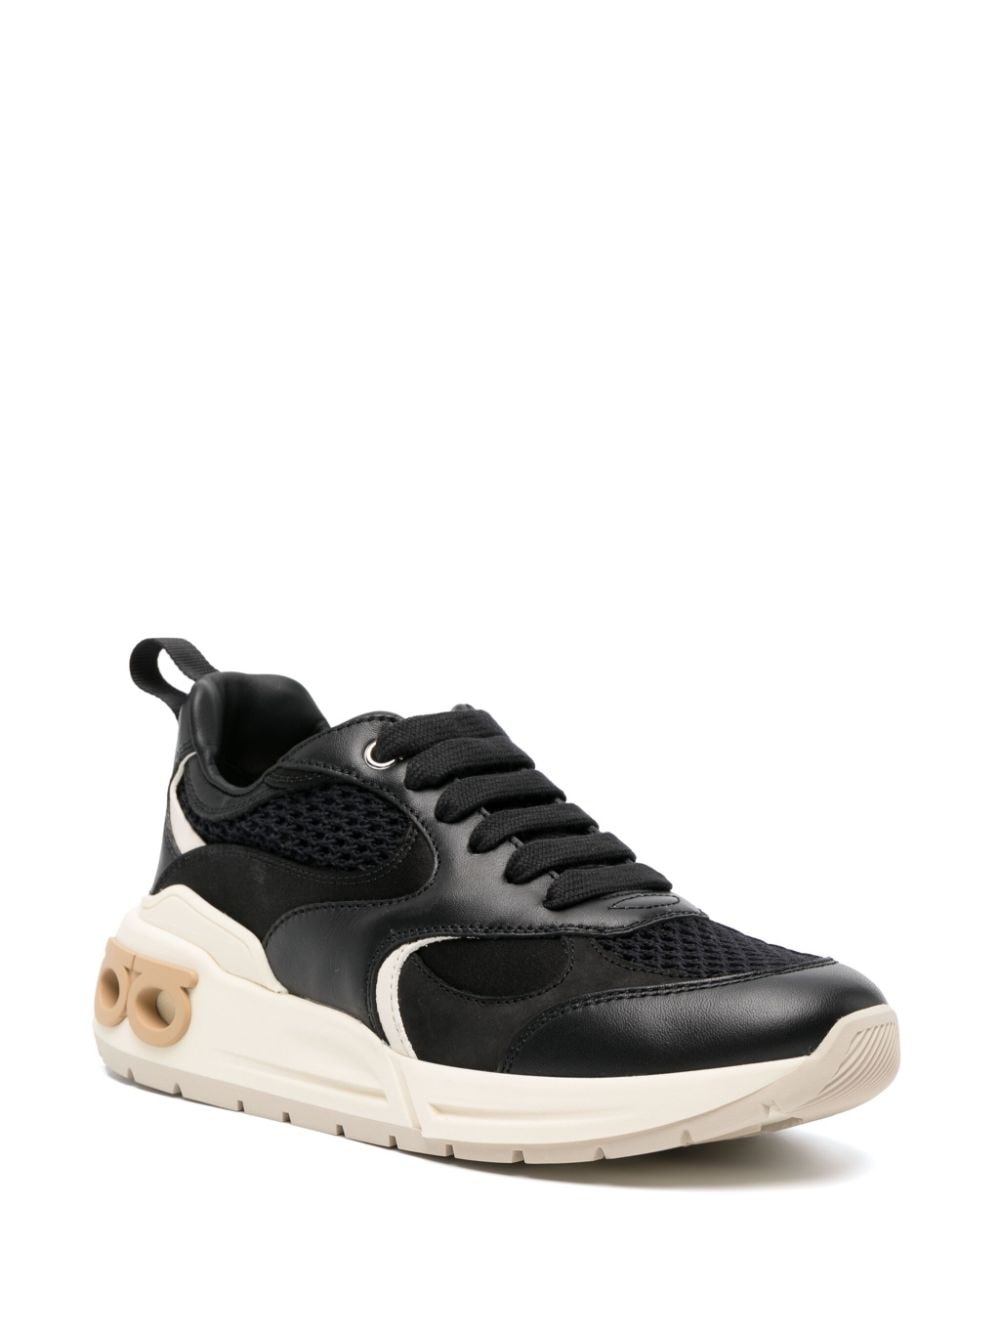 almond-toe panelled leather sneakers - 2